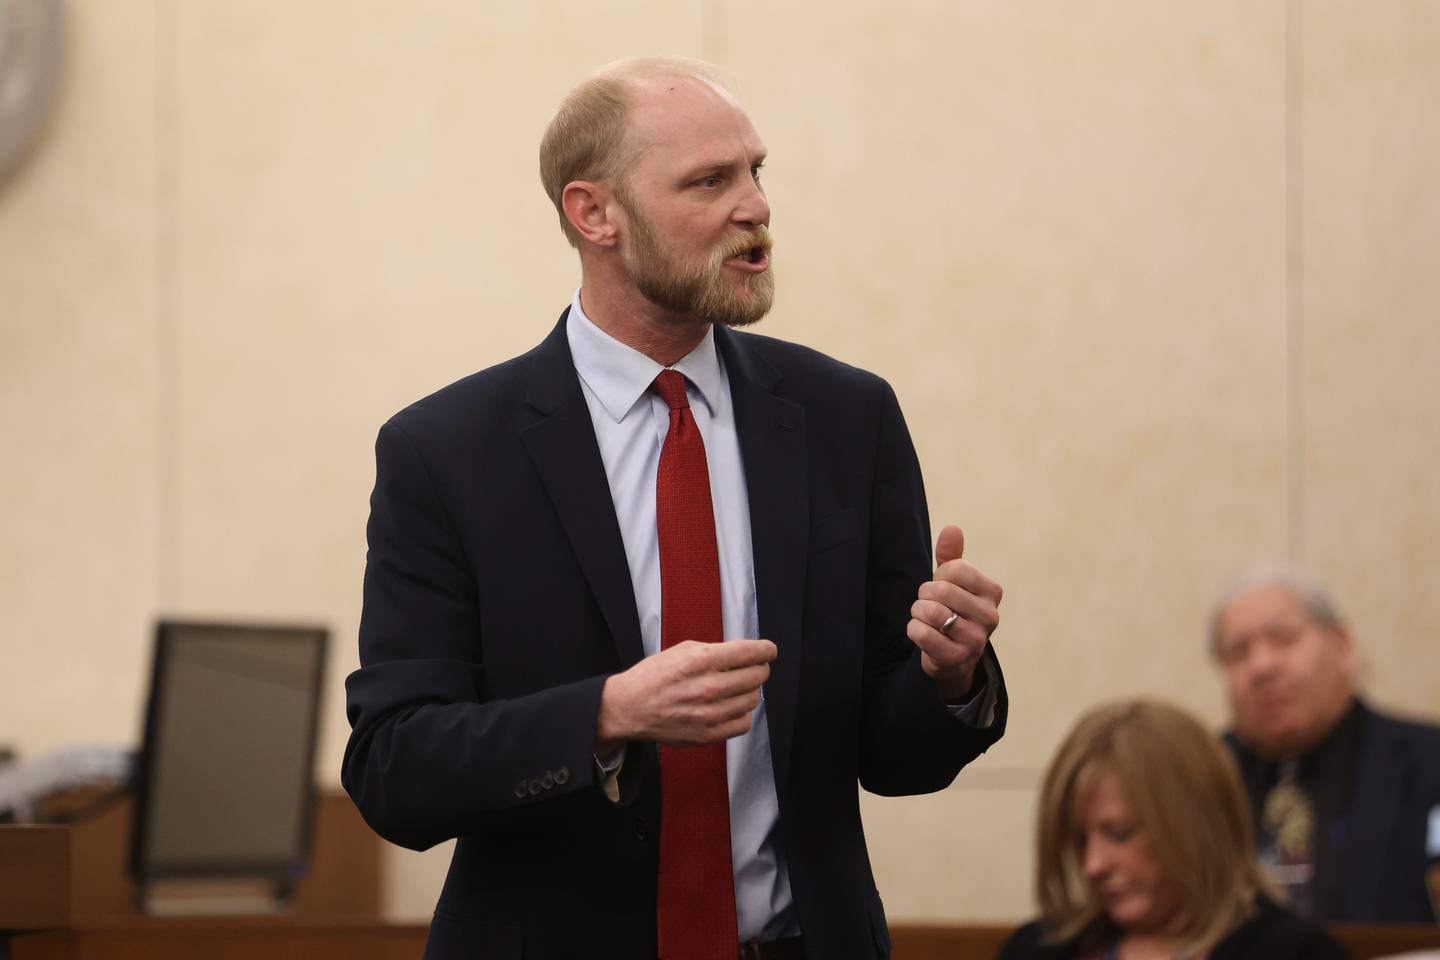 Prosecutor Adam Capelli makes closing arguments on Monday in the case against Sean Woulfe at the Will County Courthouse. Sean Woulfe, 29, is charge with reckless homicide of Lindsey Schmidt, 29, and her three sons, Owen, 6, Weston, 4, and Kaleb, 1. Monday, Mar. 28, 2022, in Joliet.